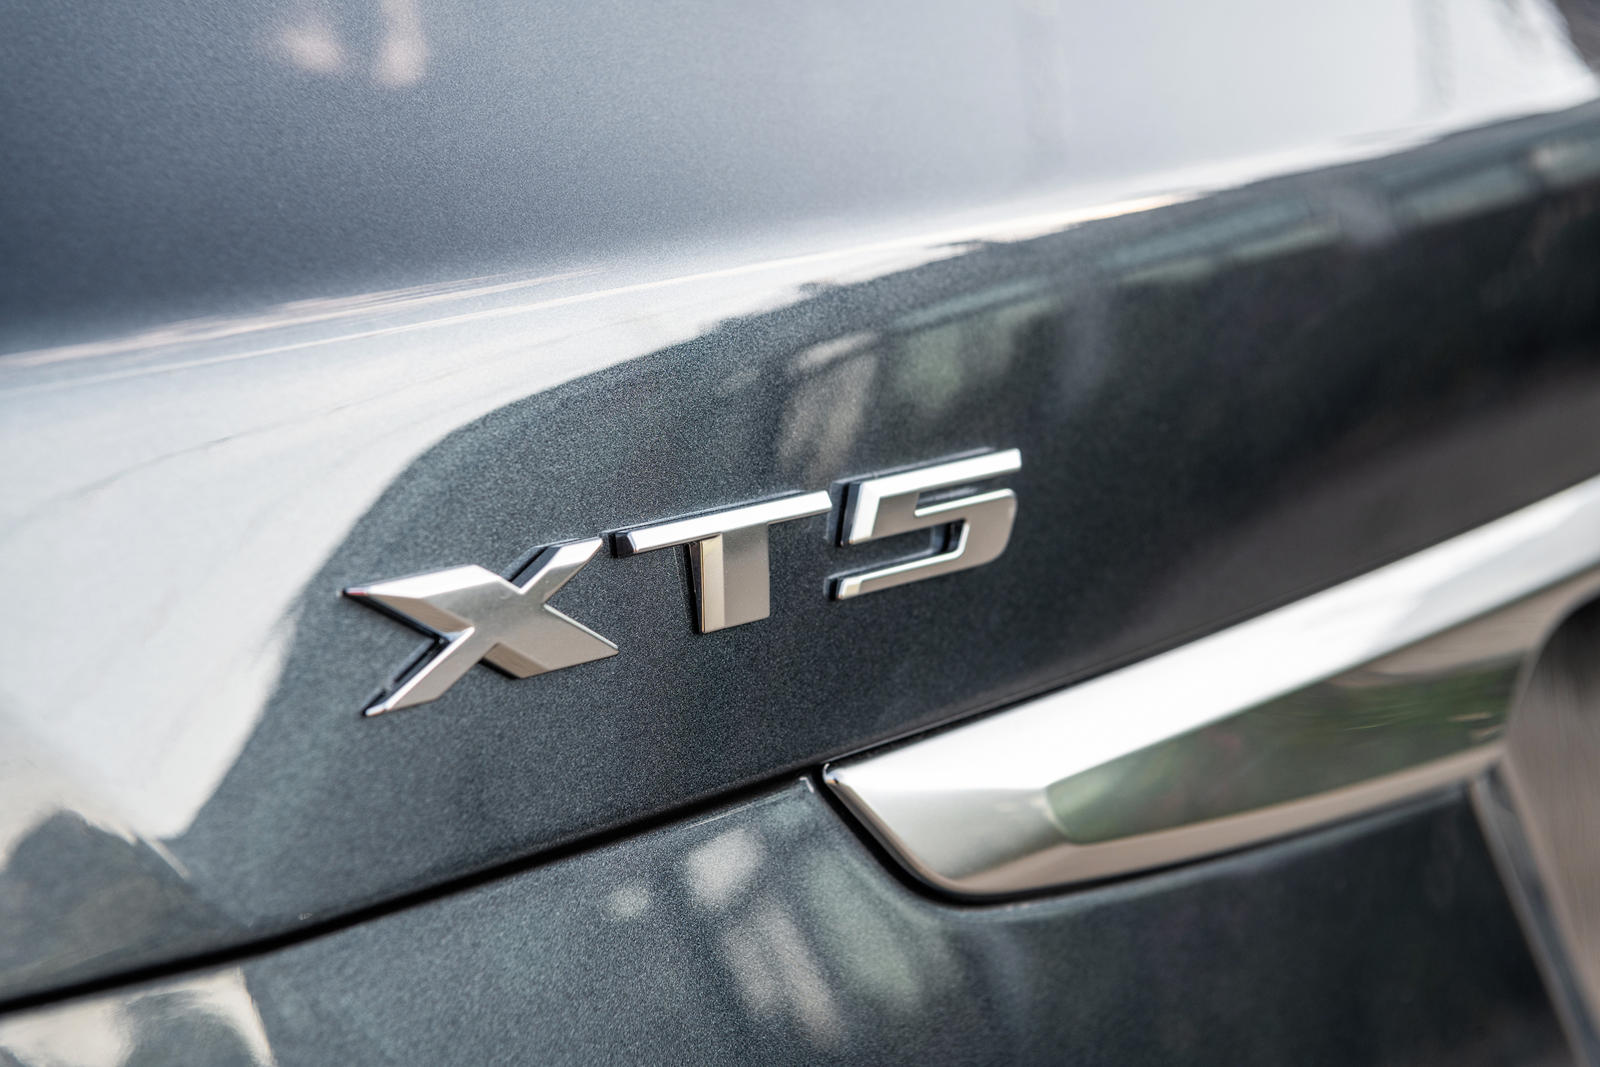 A close up of the XT5 badge on a Cadillac.